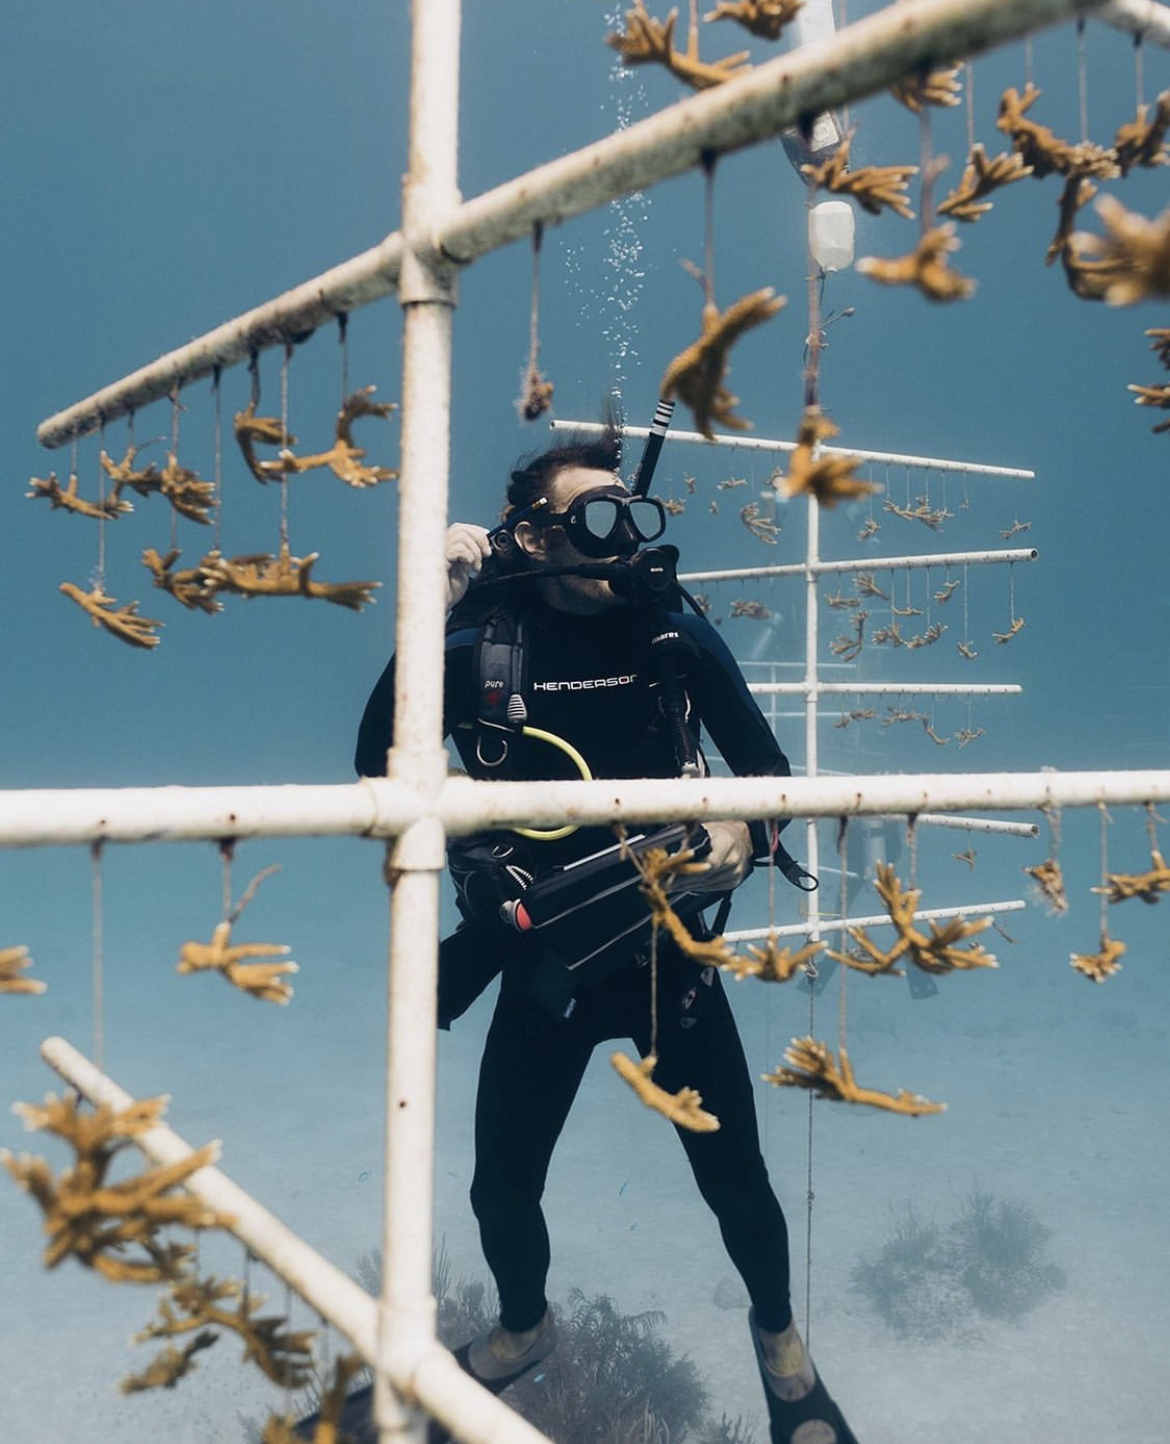 Growing 10,000 corals for reef restoration in the Bahamas (demo)